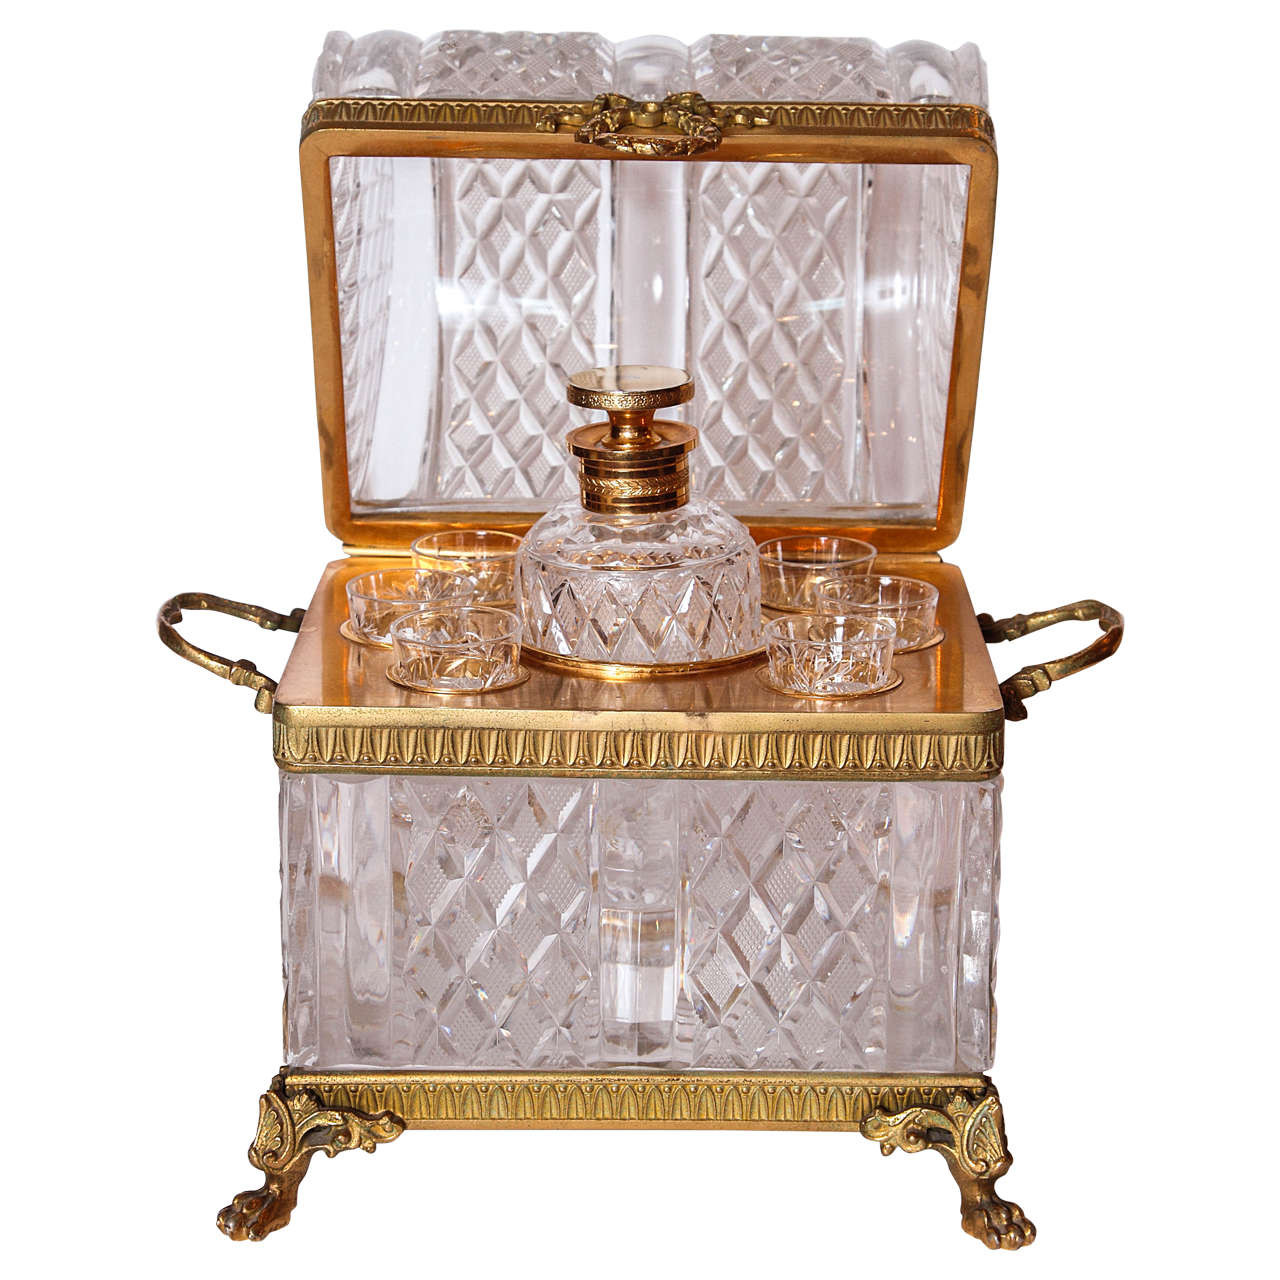 19th Century French Baccarat Crystal Dome-Shaped Decanter Set